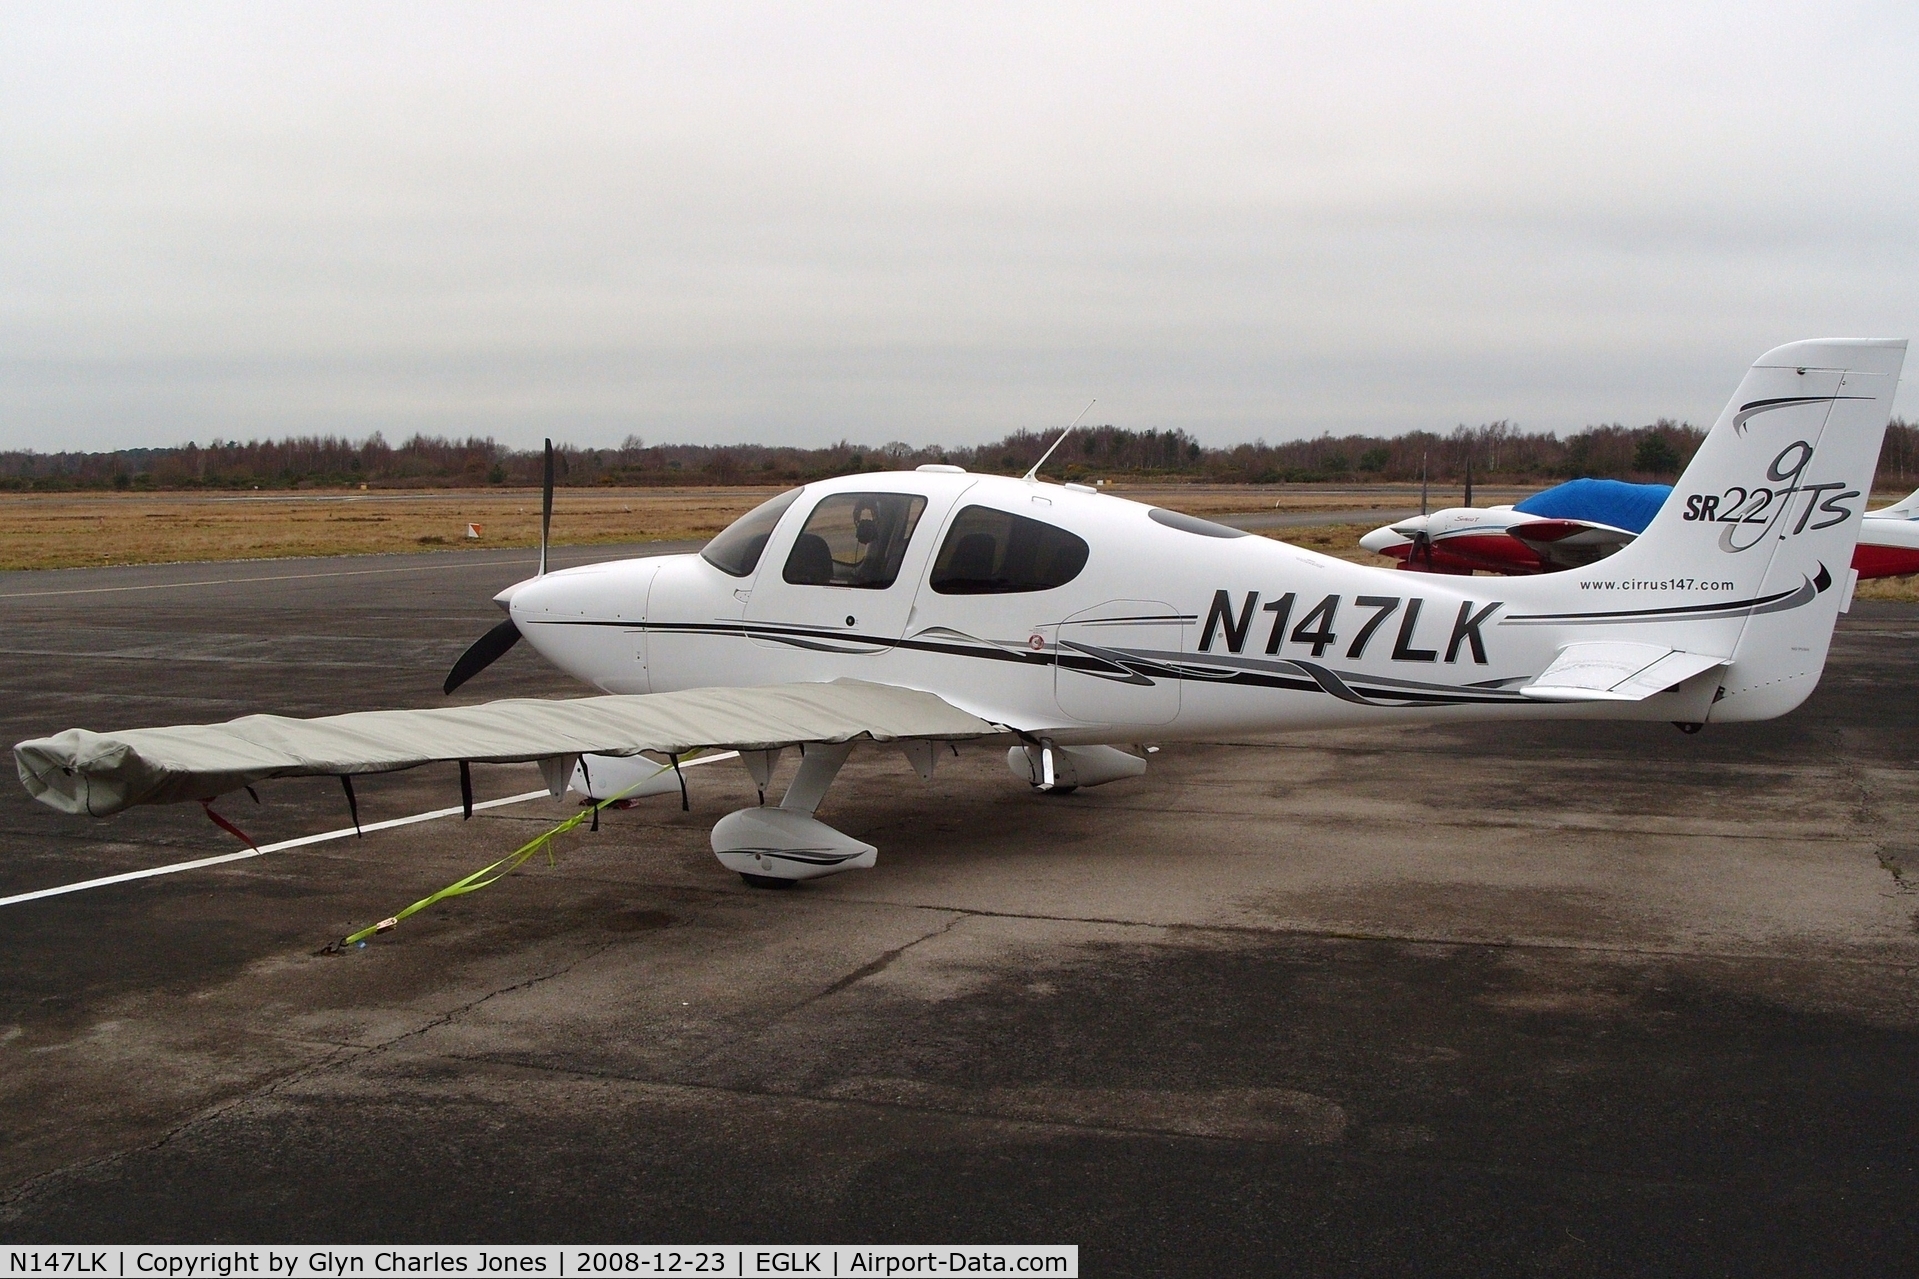 N147LK, 2005 Cirrus SR22 GTS C/N 1687, Previously N754CD. With wing covers. Owned by Free Flight Aviation Inc Trustee.